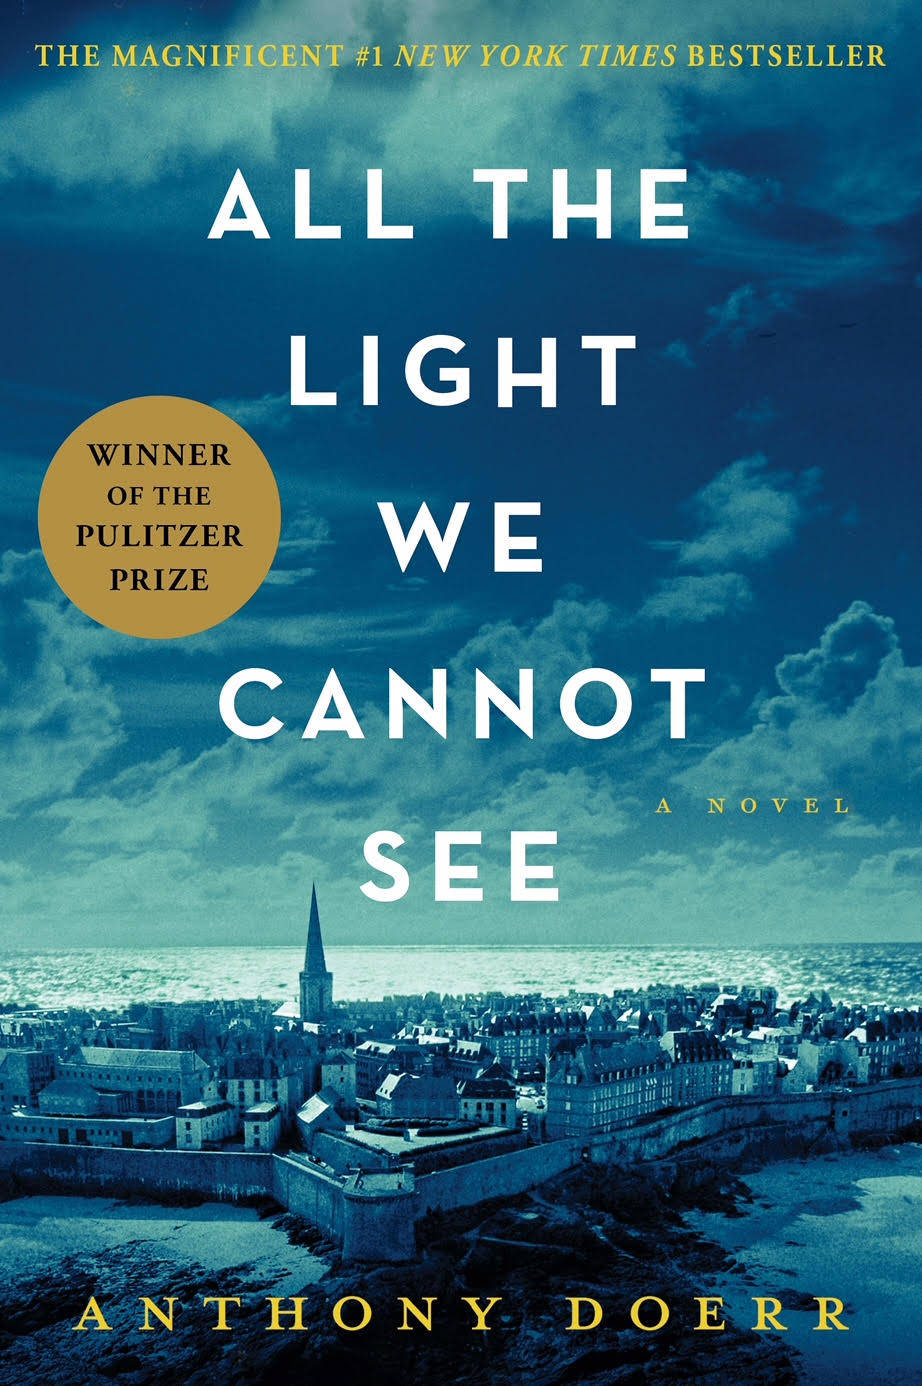 The book cover of Anthony Doerr’s novel, “All the Light we Cannot See.” (Photo provided by Kachemak Bay Campus)